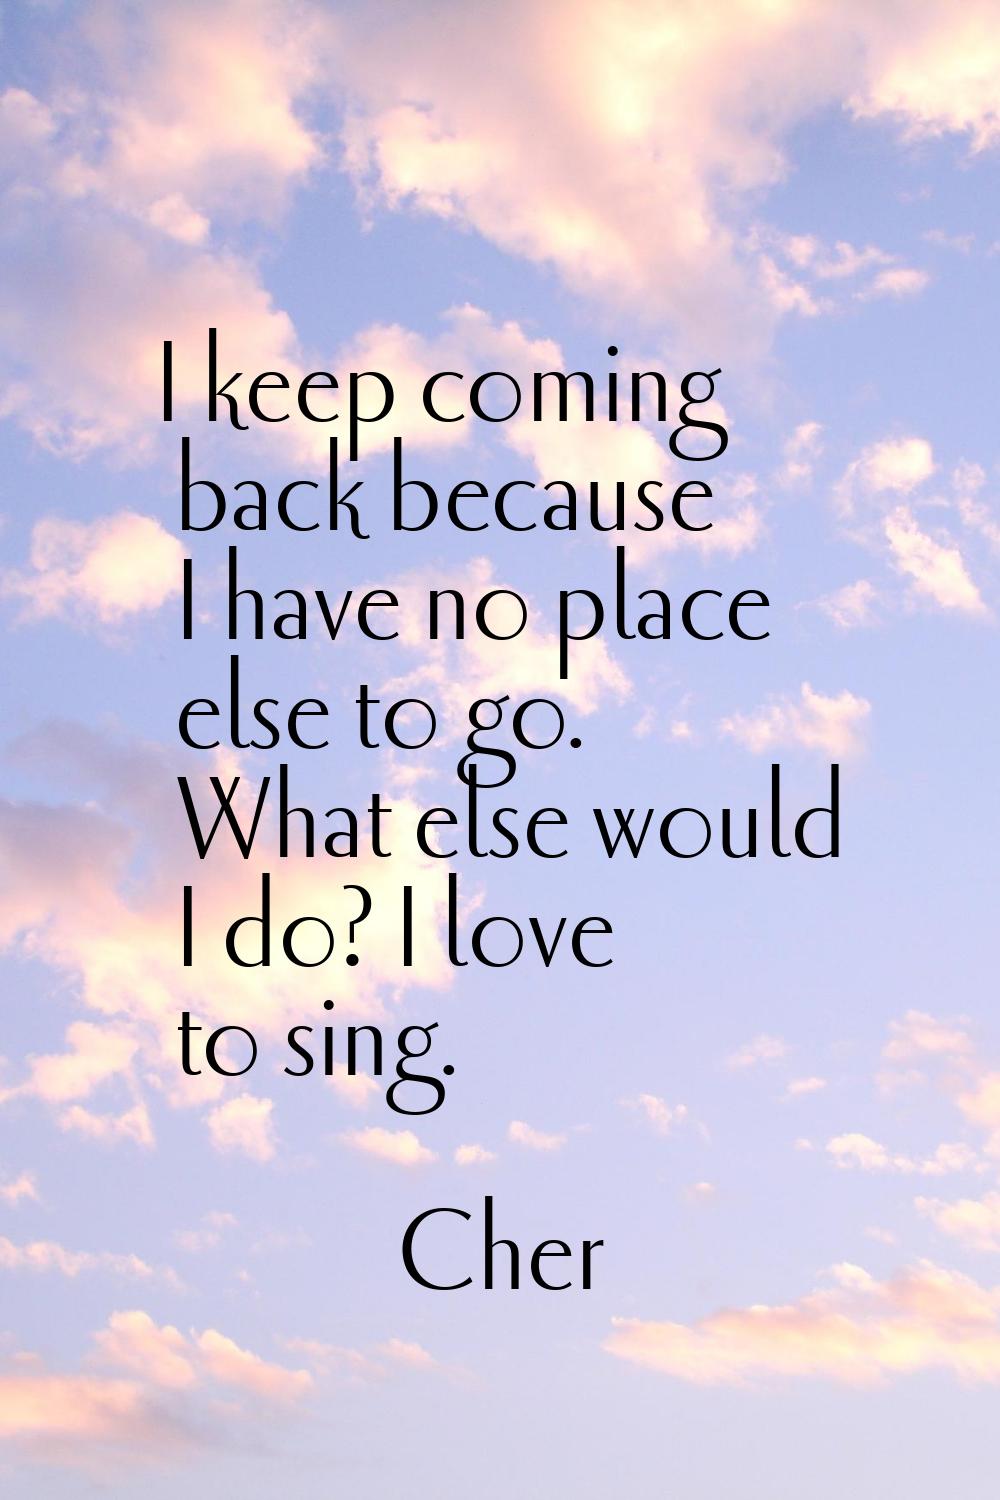 I keep coming back because I have no place else to go. What else would I do? I love to sing.